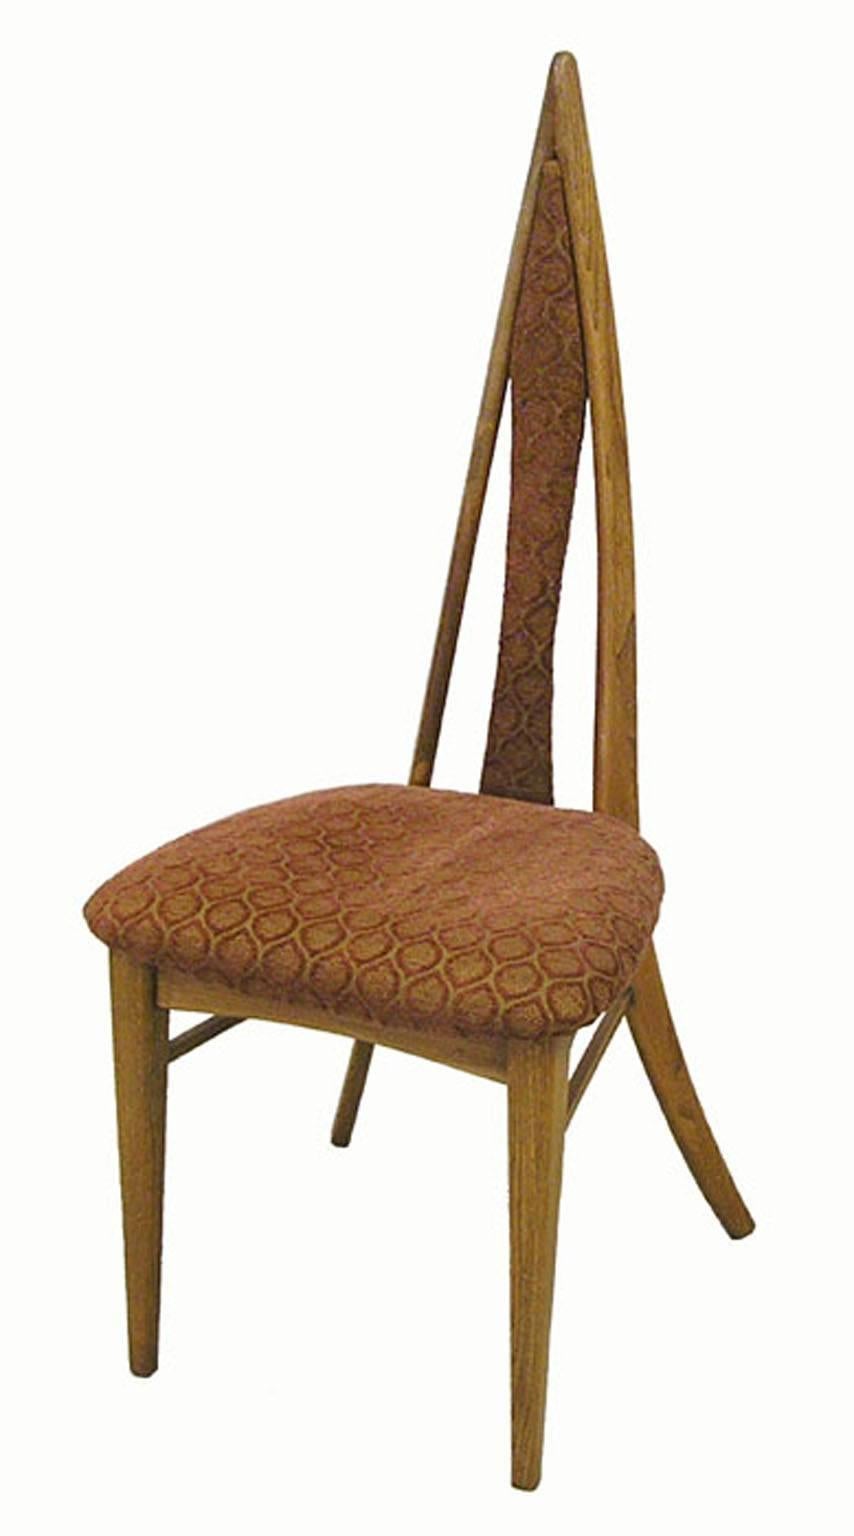 A unique set of four ash dining chairs from the 1950s Mid-Century Modern era by Canadian cabinetmakers Danis et Freres of Granby, Quebec. Beautifully crafted featuring a solid sculpted ash frame with a narrow steepled backrest and sprawled back